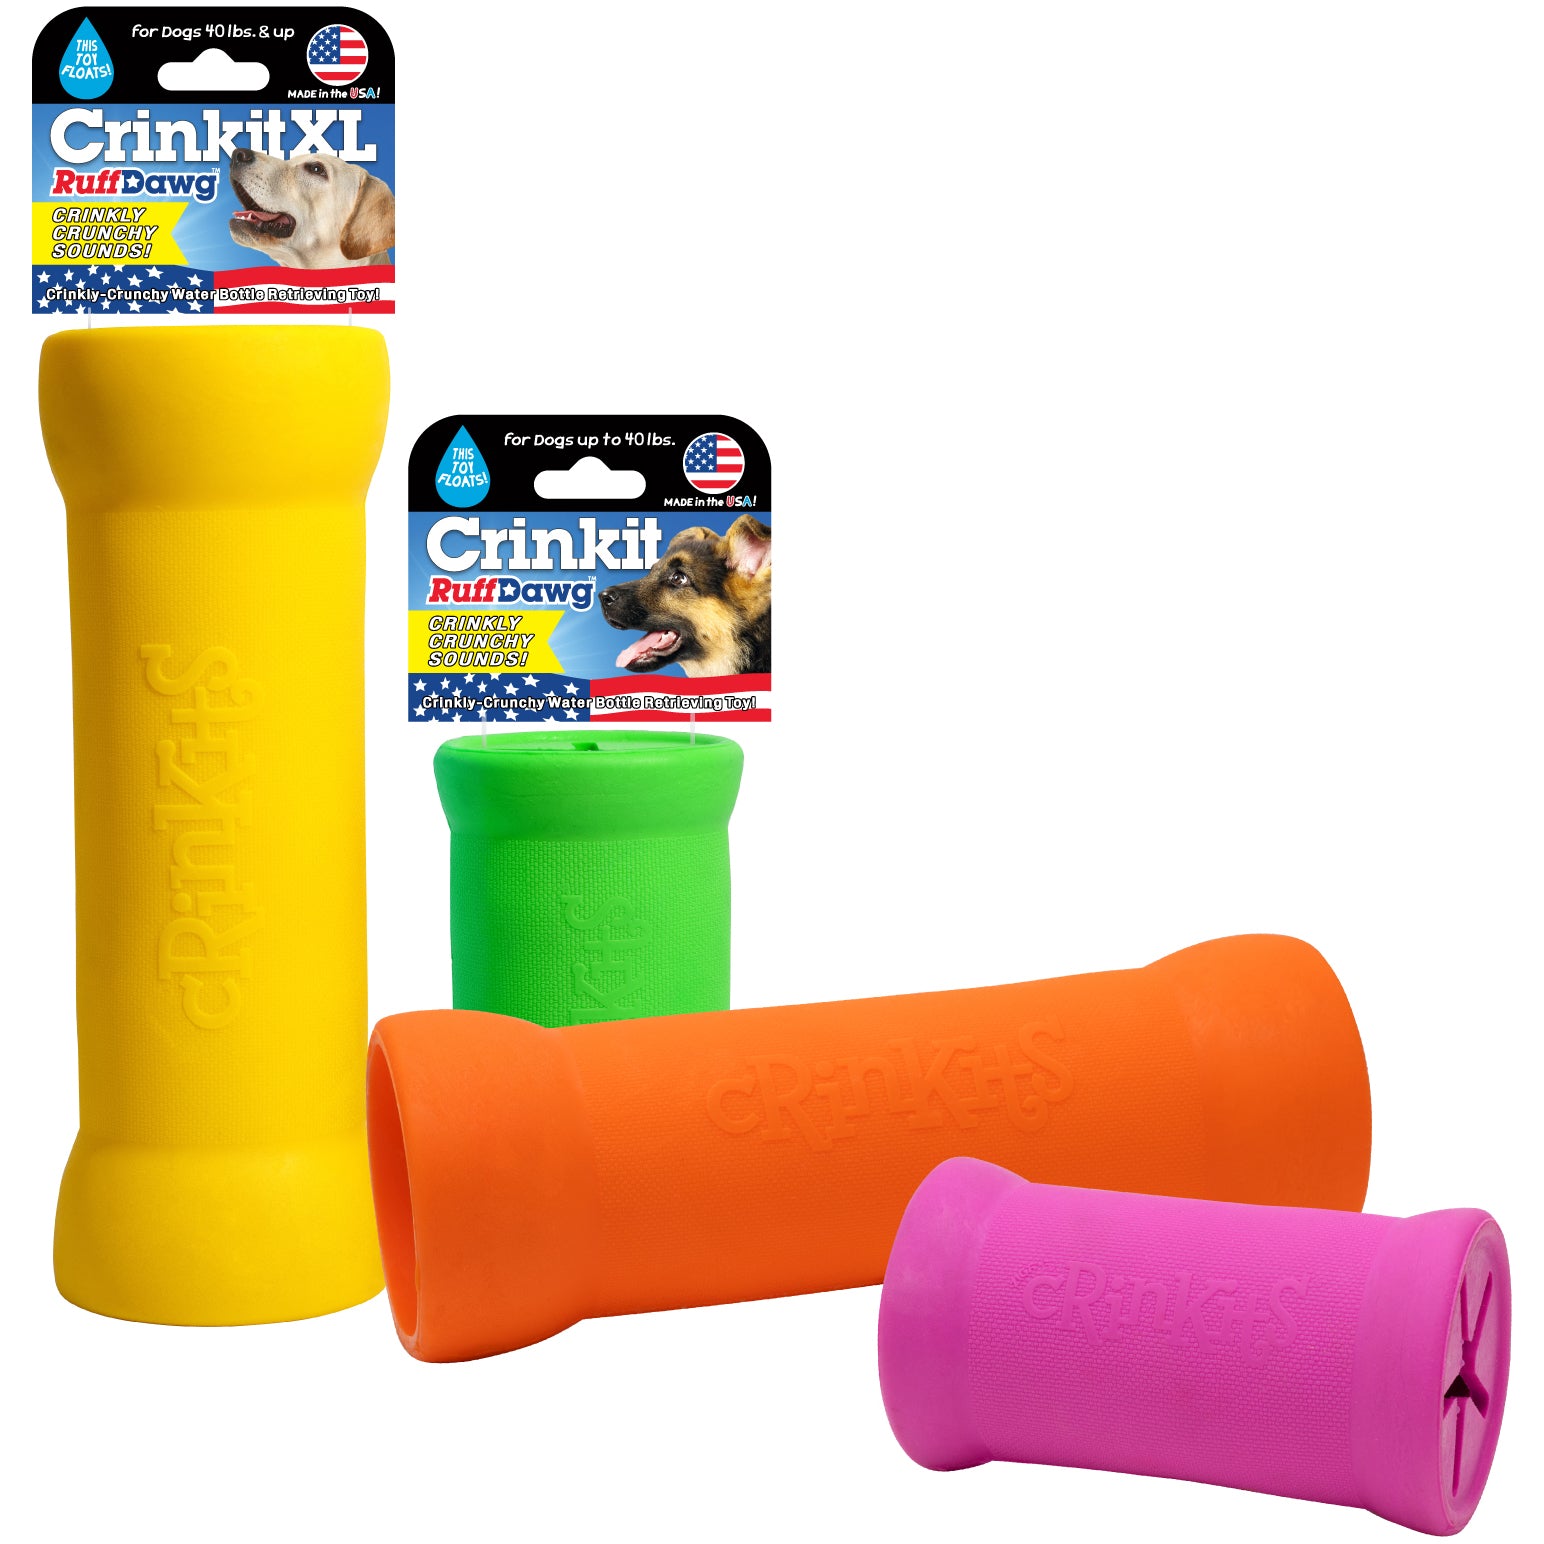 RuffDawg USA Crinkit Rubber Dog Toy, Assorted